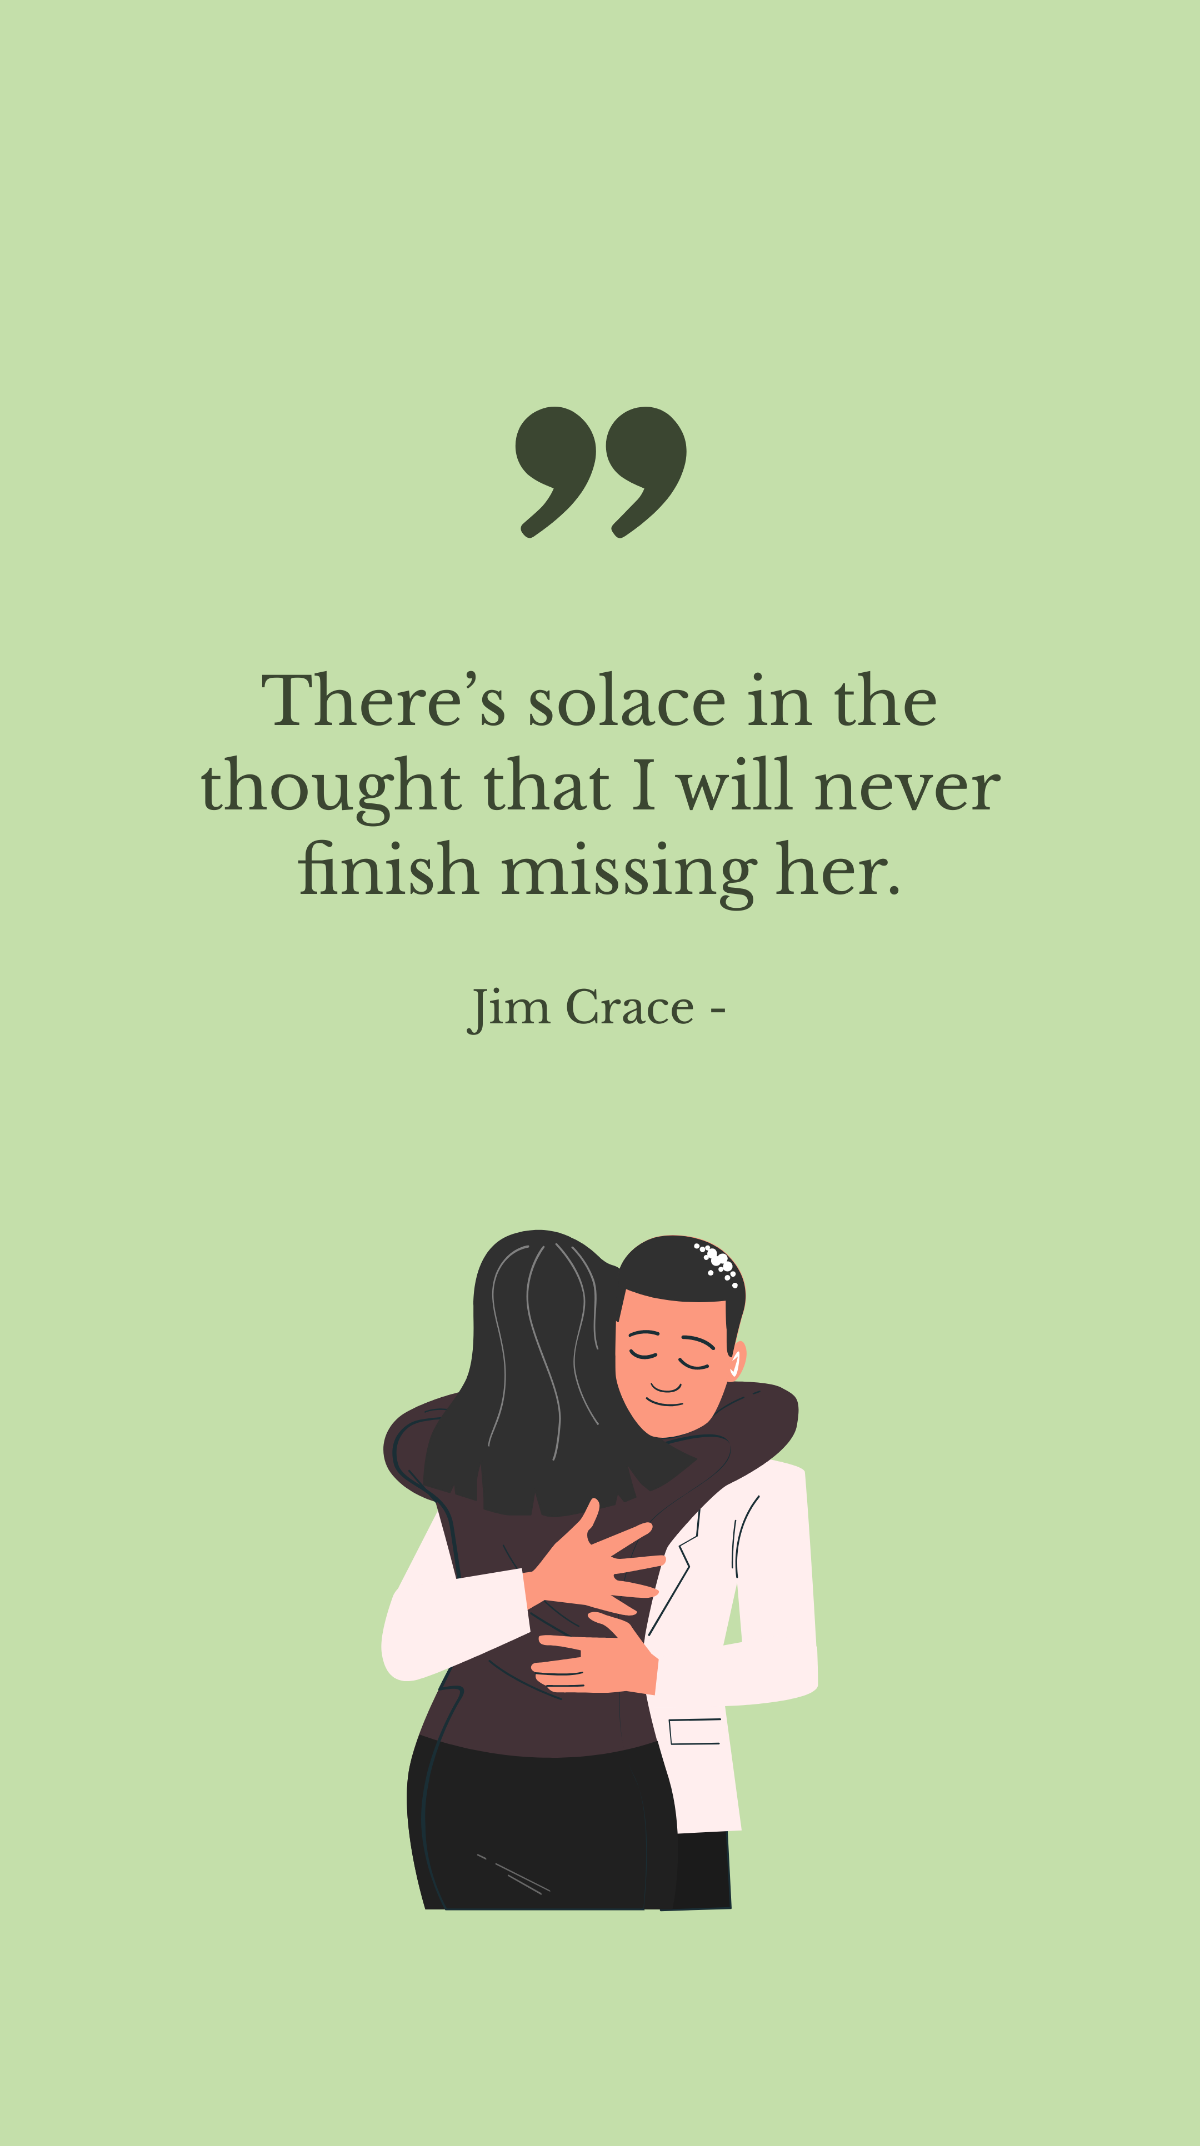 Jim Crace - There’s solace in the thought that I will never finish missing her.